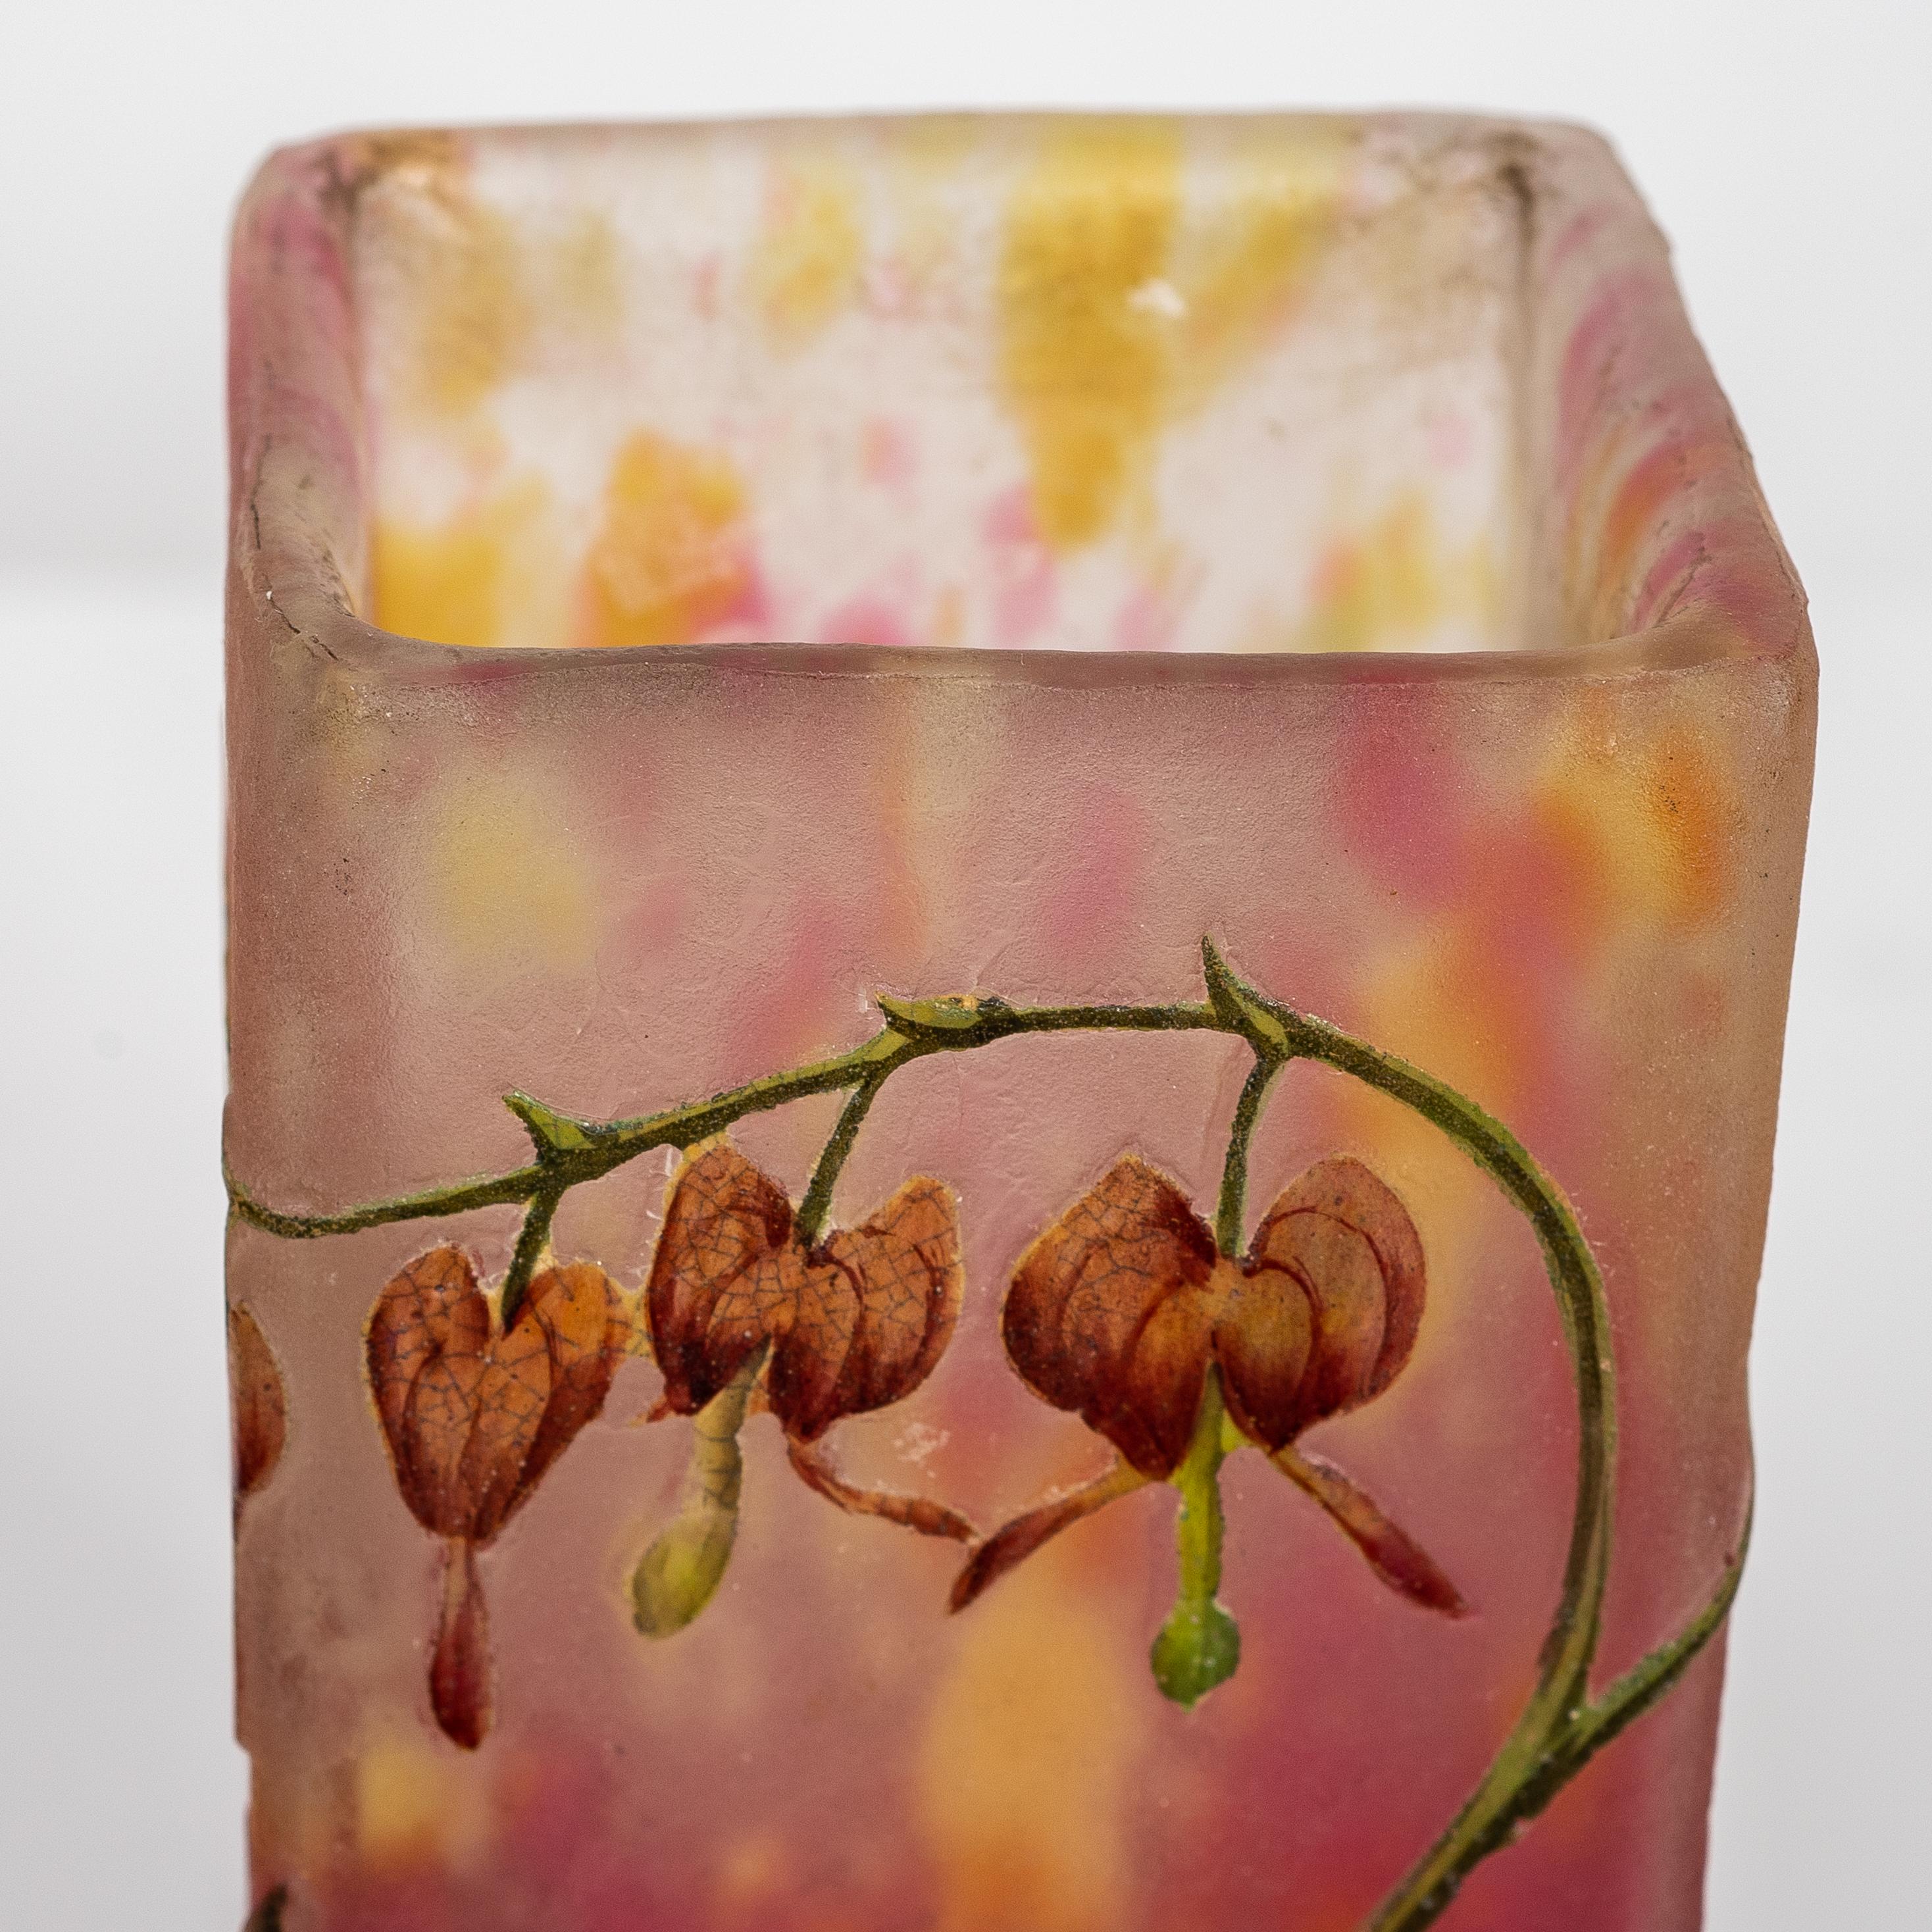  Daum Nancy cameo and enamel glass vase,
France, circa 1910
Decorated with pink wild flowers on a mottled ground
Cameo mark Daum Nancy with Lorraine cross
Dimensions:
Width 2 in. (5.1 cm.)
Height 4.64 in. (11.8 cm).
  